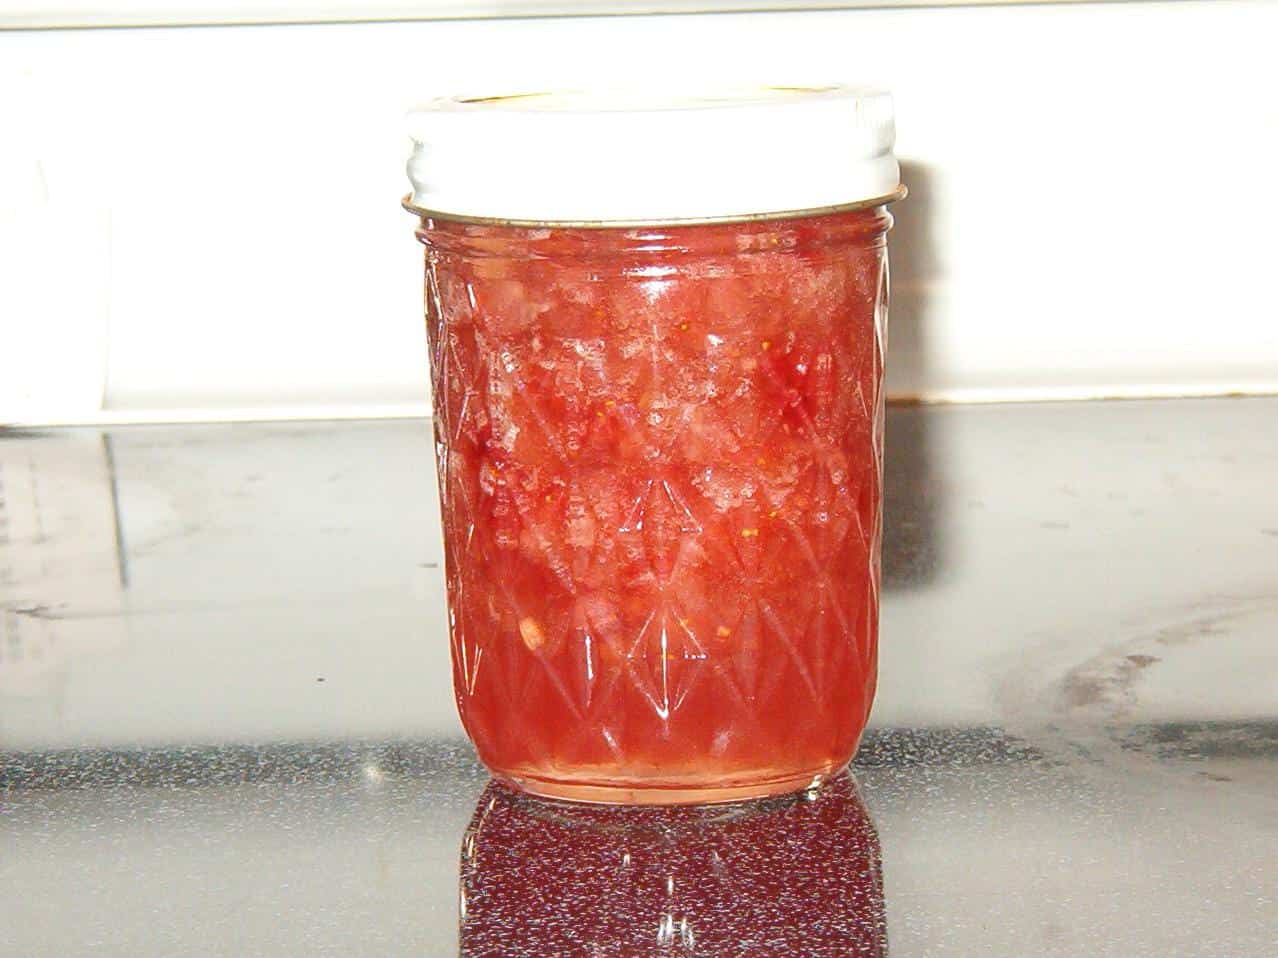 Delicious Homemade Banberry Jam Recipe for Breakfast